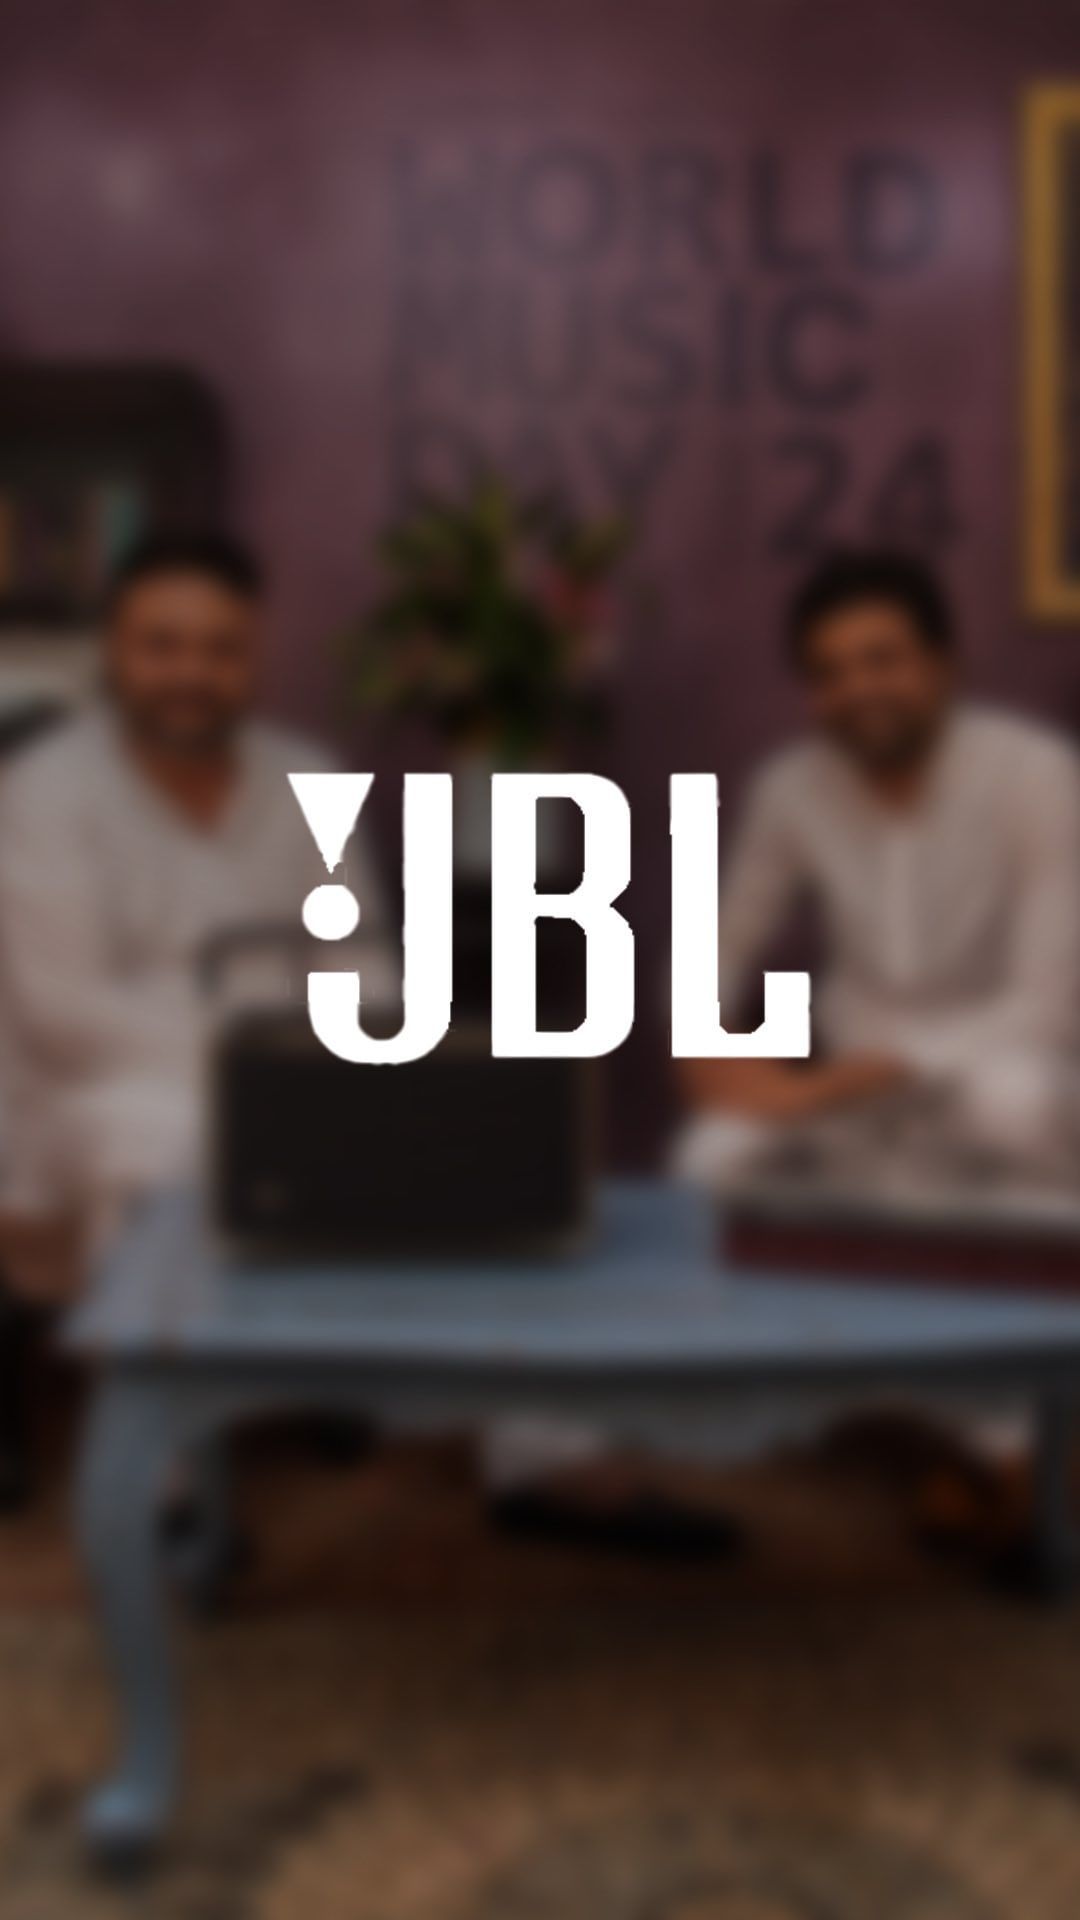 Celebrating culture and Authentic music on World Music Day with JBL ! 

#WorldMusicDay #JBLAudio #JBLMusic #JBLAuthentic...